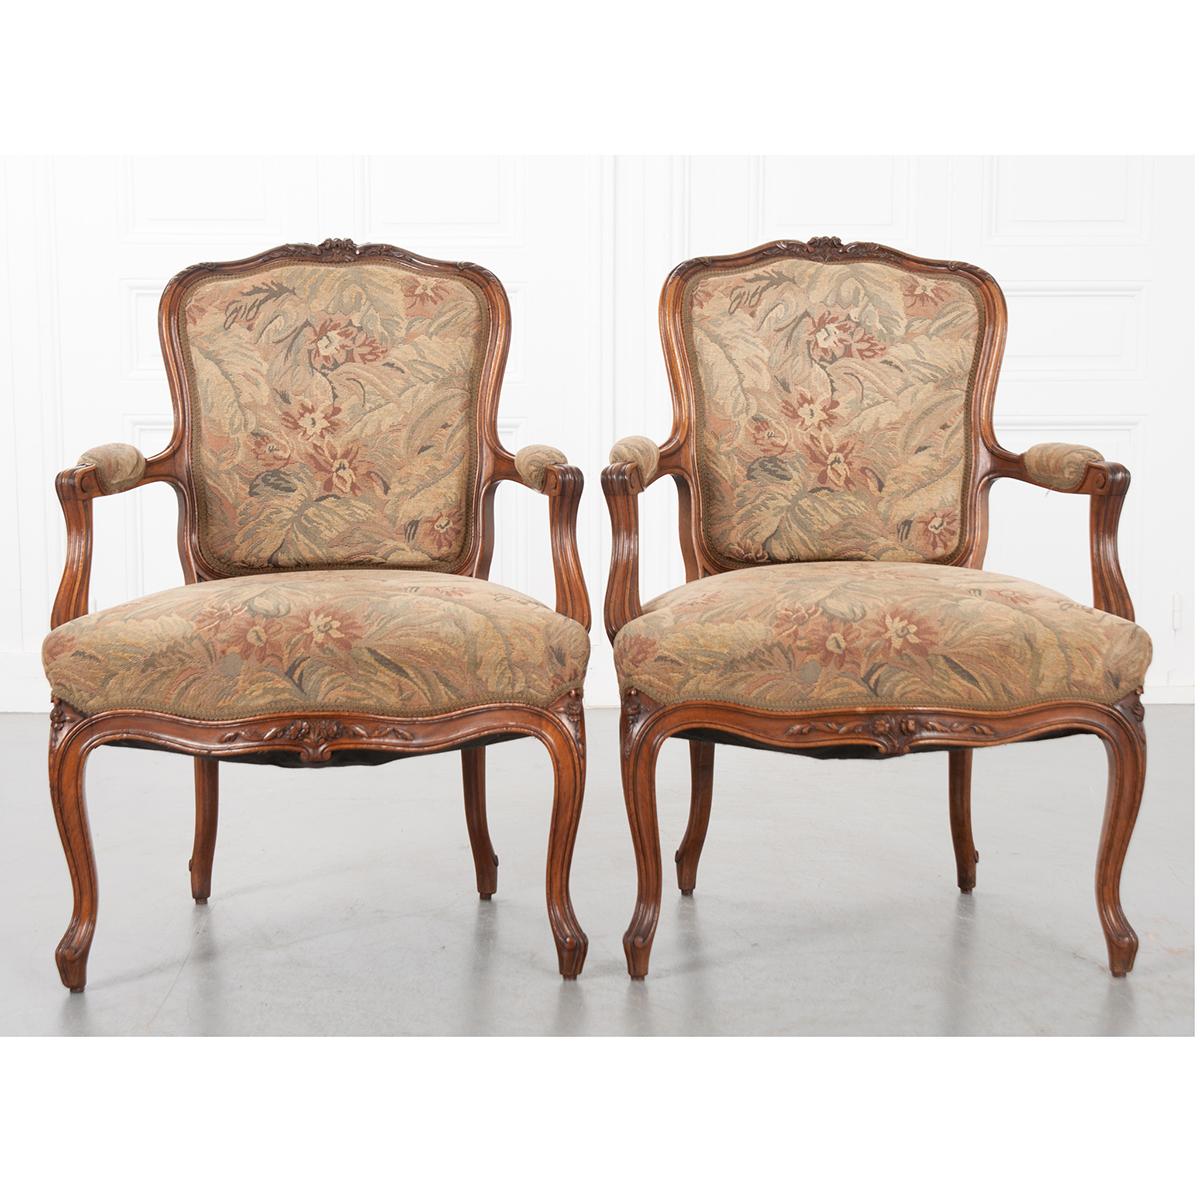 20th Century Pair of French Louis XVI-Style Fauteuils